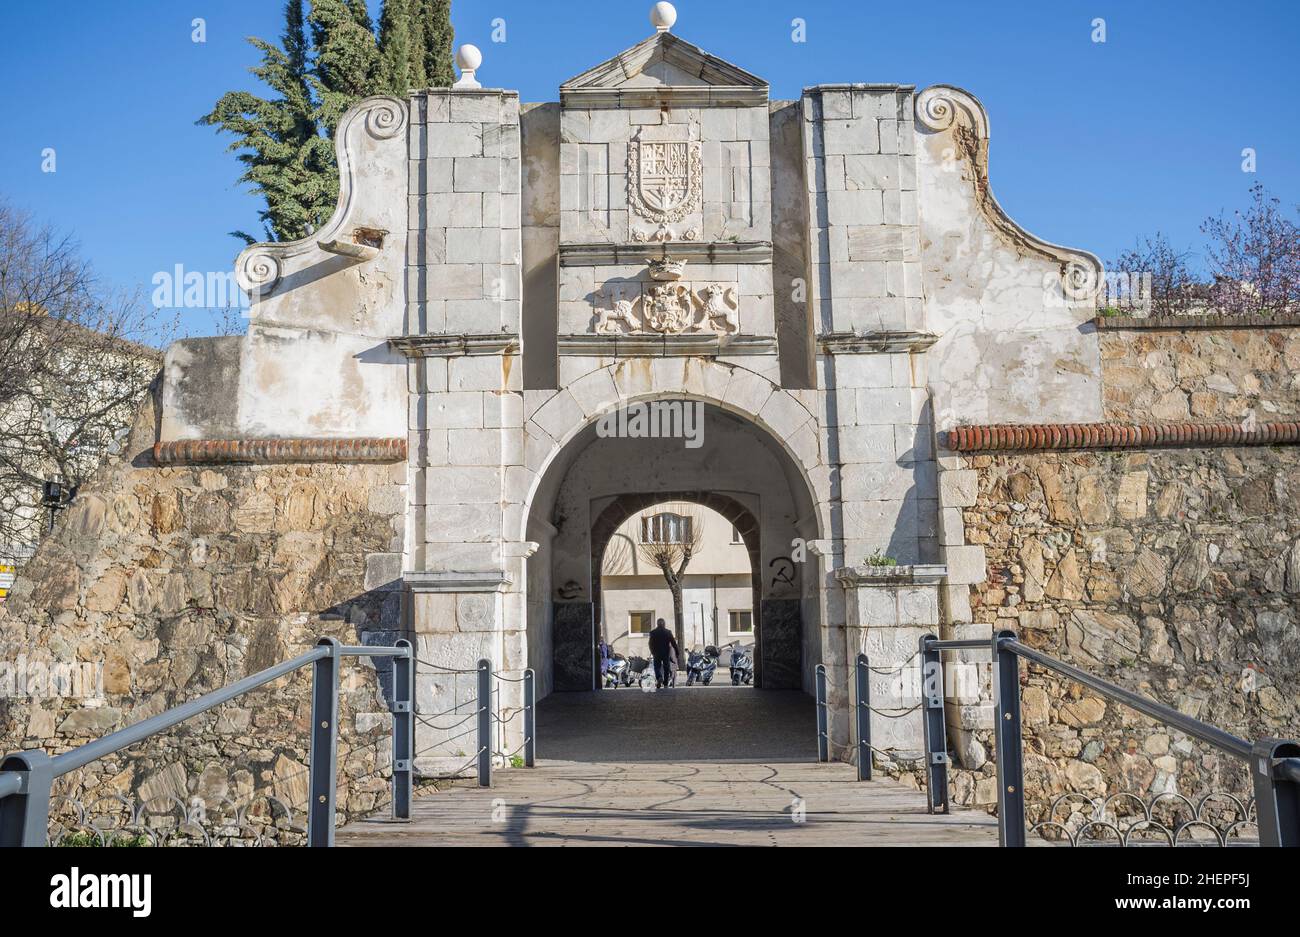 Pilar Gate or Puerta Pilar, Badajoz, Extremadura, Spain. Entrances to the bastioned fortification built in 17th century Stock Photo